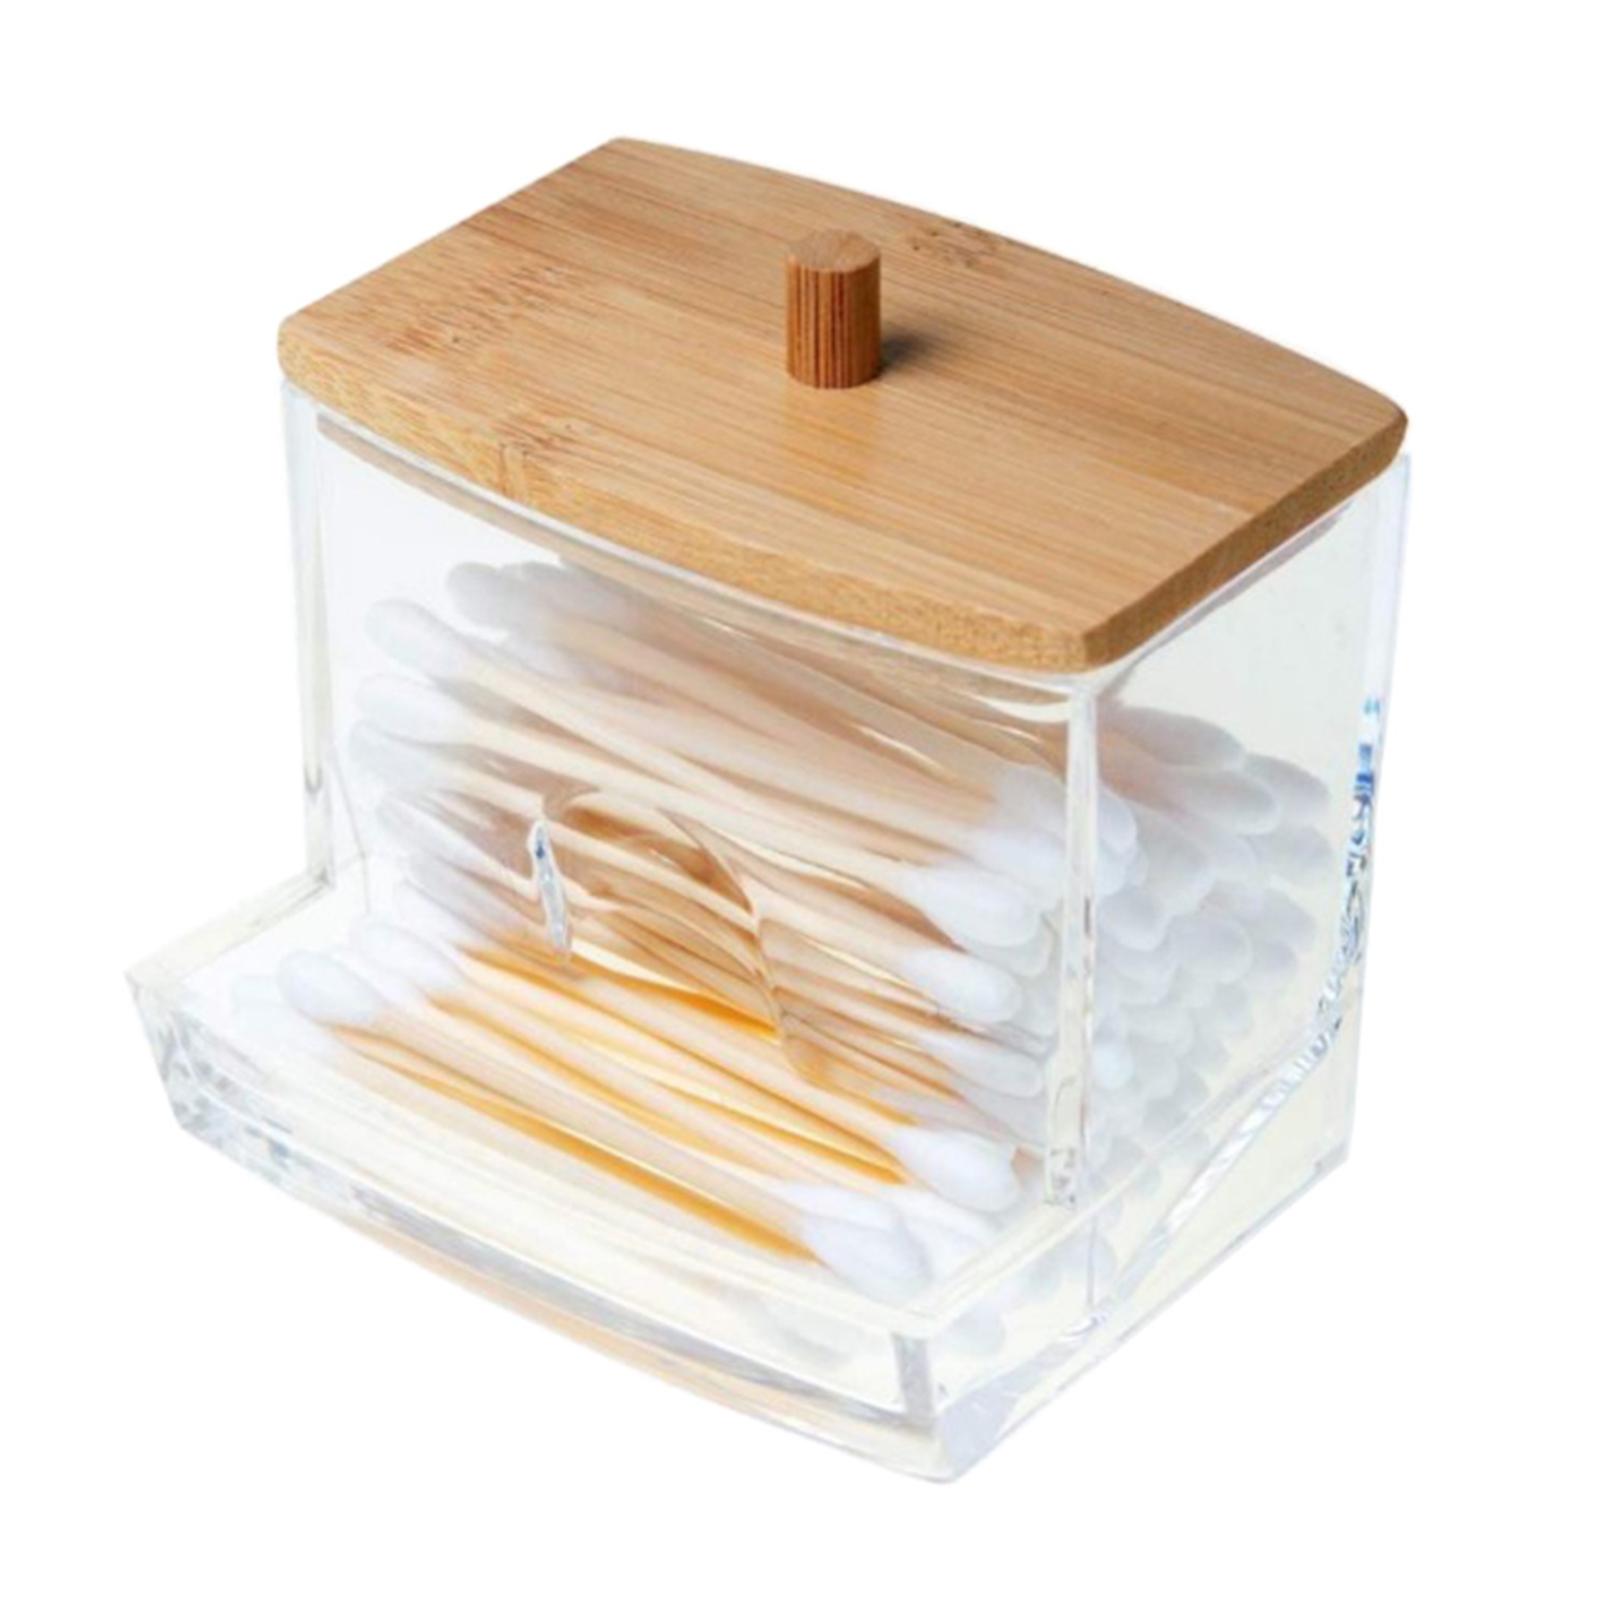 Upgrated Acrylic Cotton Swabs Storage Holder Bathroom Containers Apothecary Jar Qtip Holder for Storage Bamboo Lids